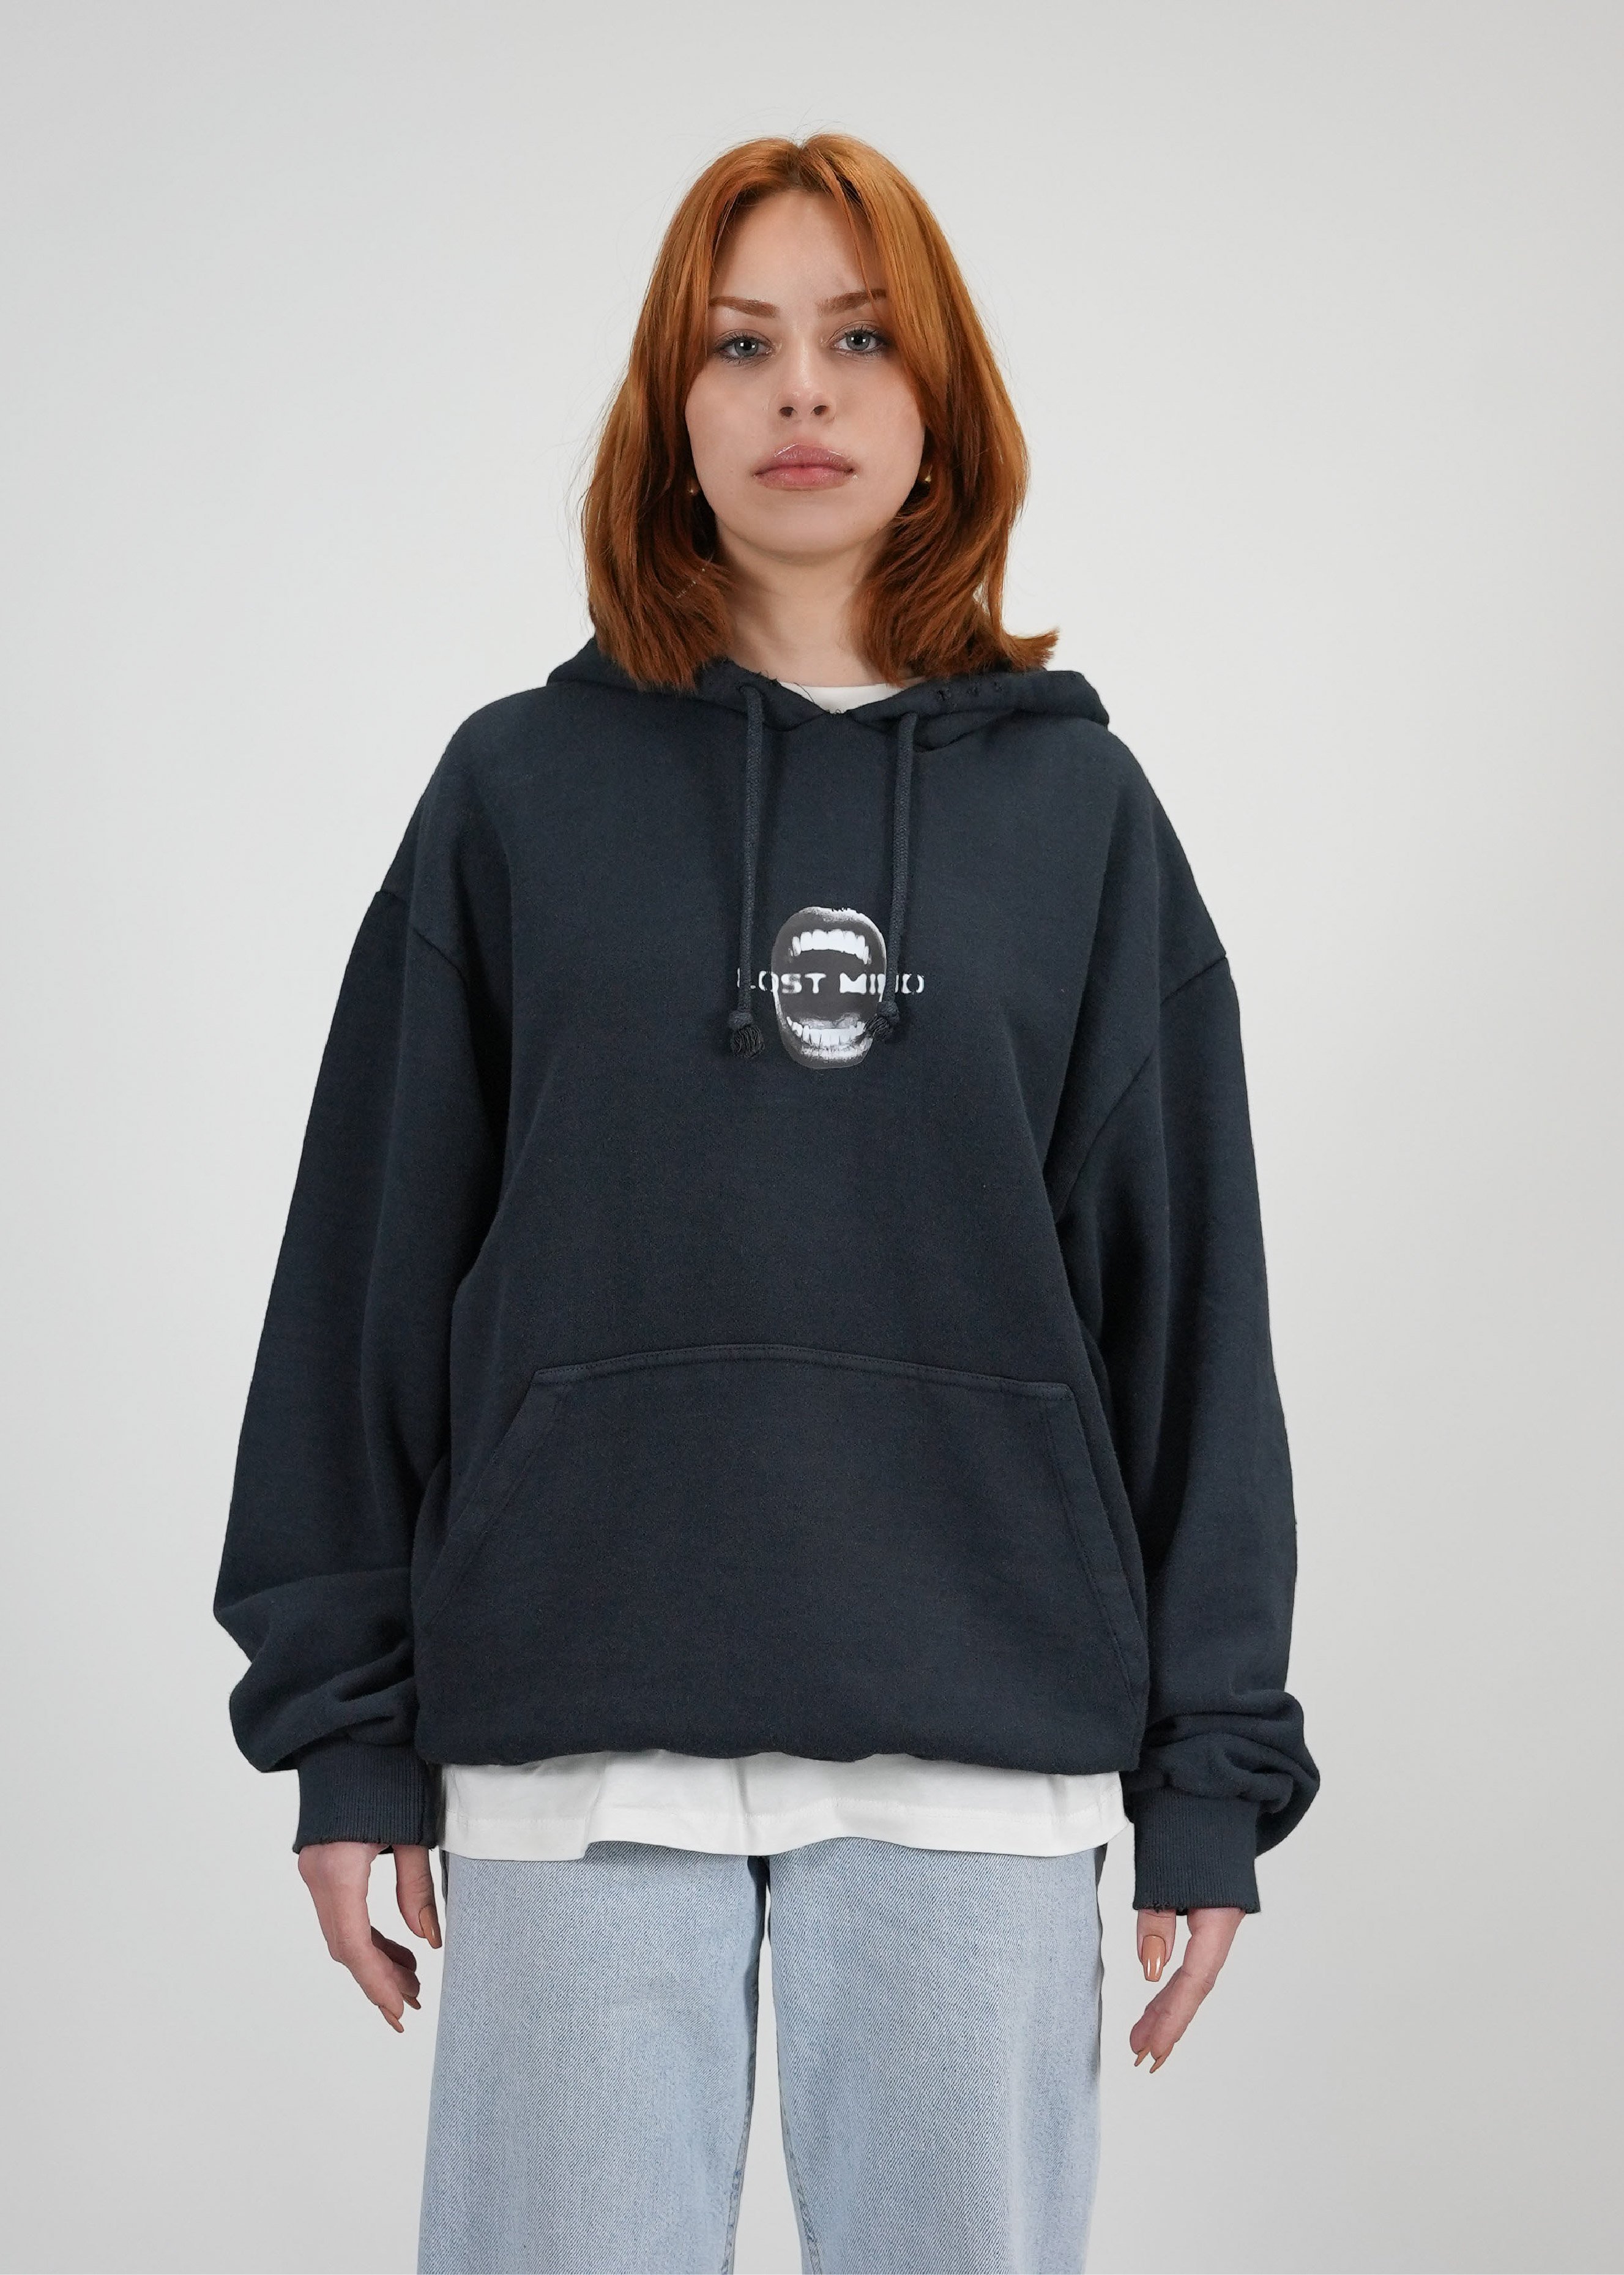 Brave Mouth Oversize Hoodie